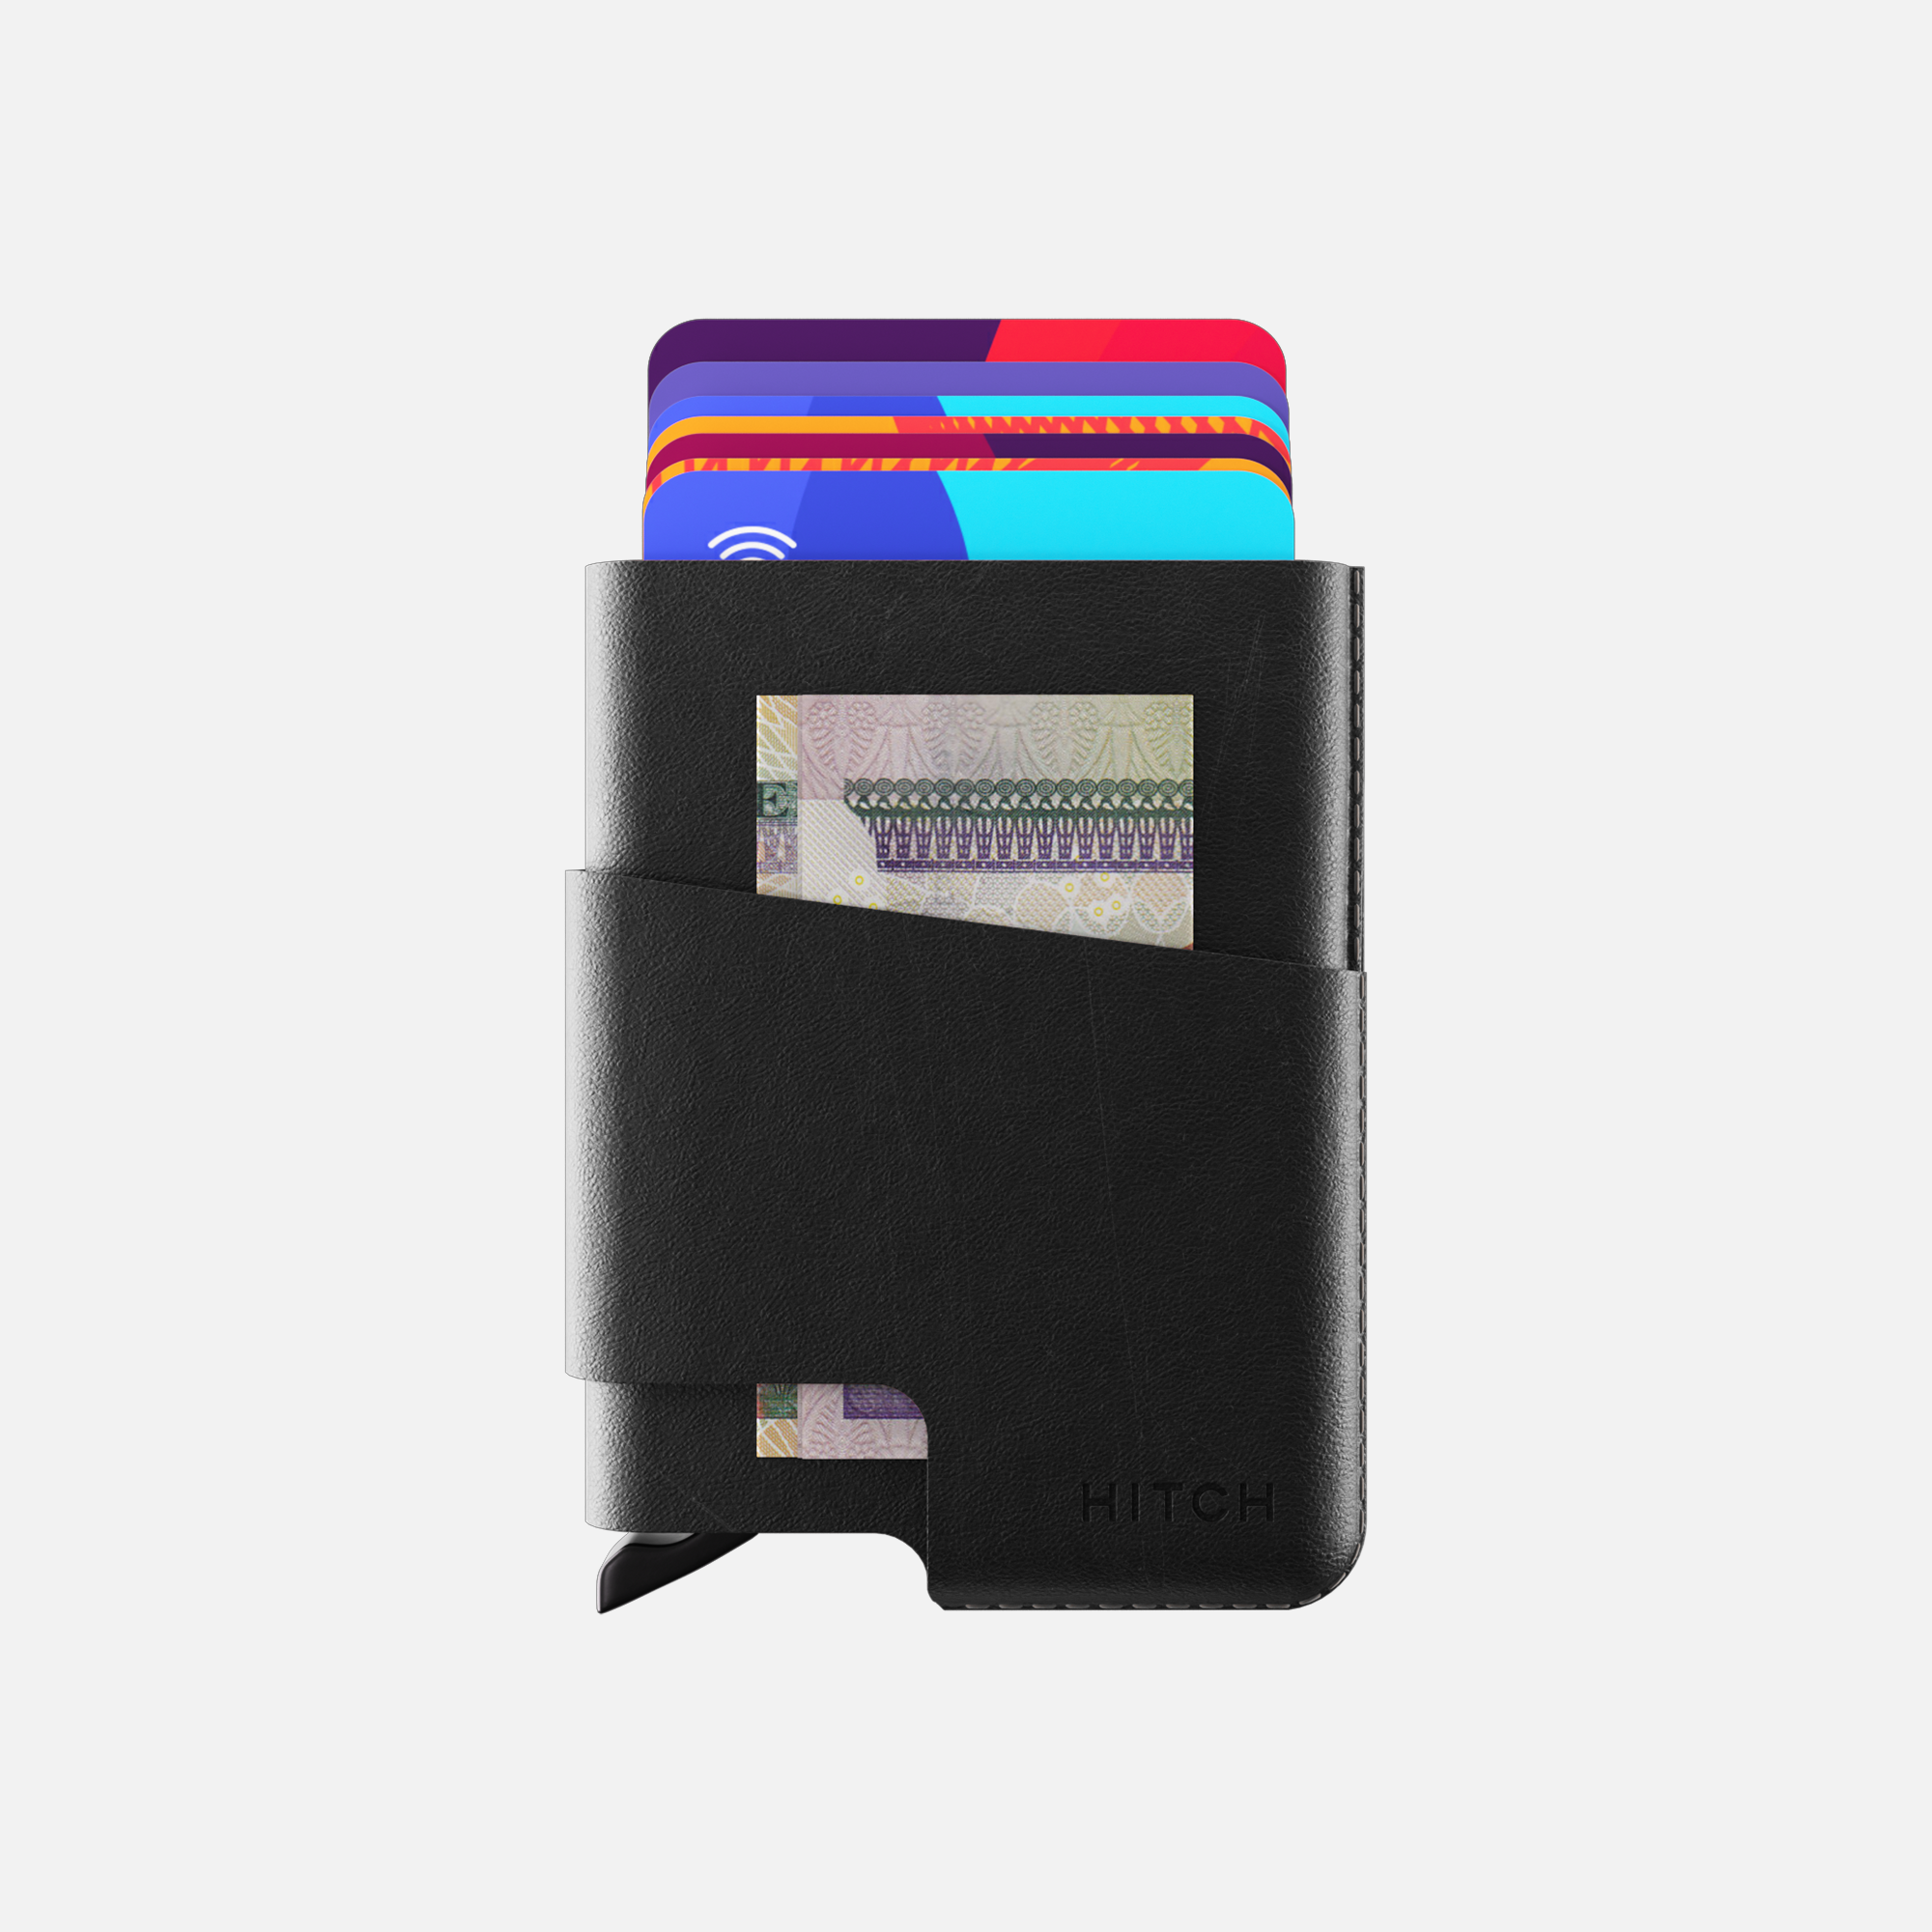 Black leather cardholder wallet with colorful credit cards and cash visible on a white background.